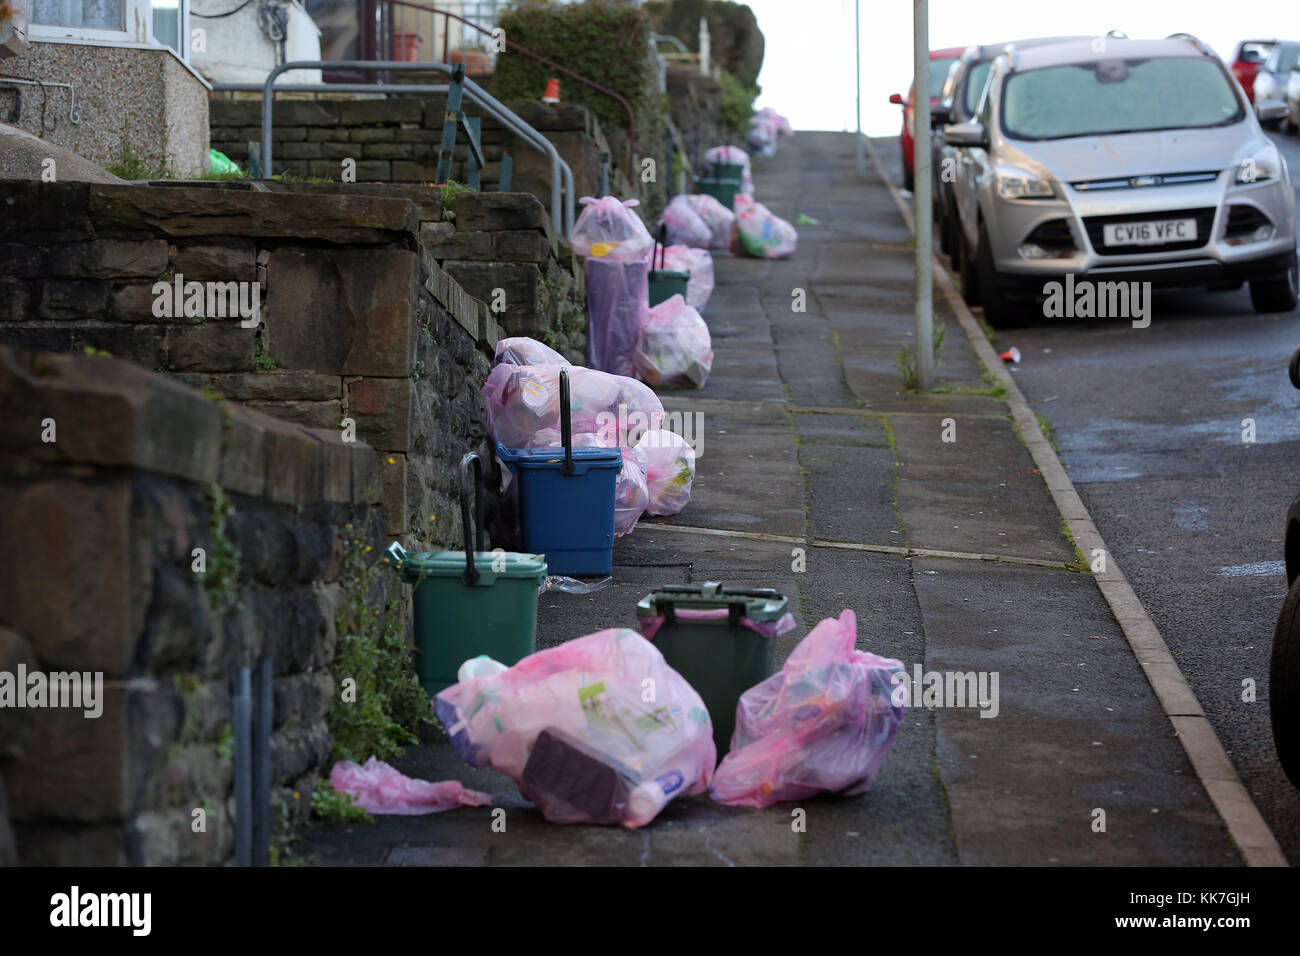 https://c8.alamy.com/comp/KK7GJH/pink-bags-used-for-the-household-recycling-of-plastics-and-bins-used-KK7GJH.jpg